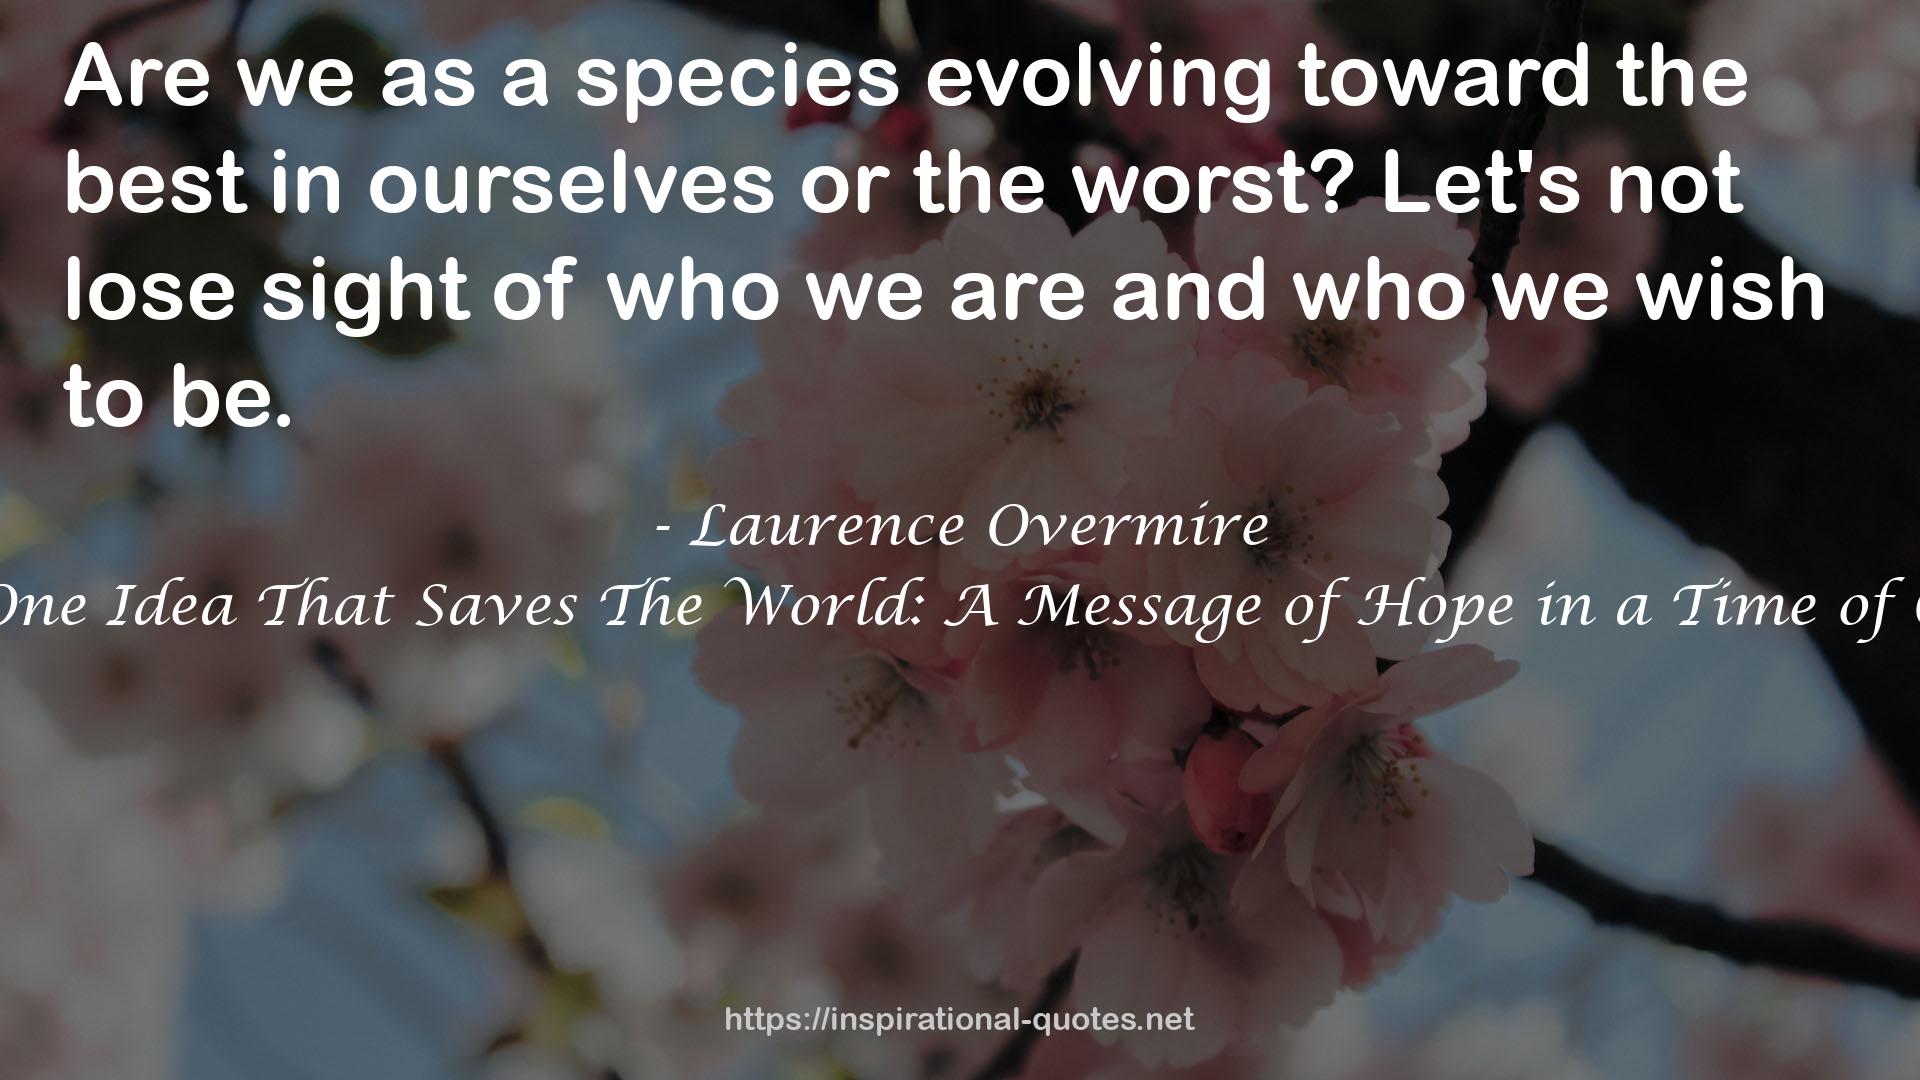 The One Idea That Saves The World: A Message of Hope in a Time of Crisis QUOTES